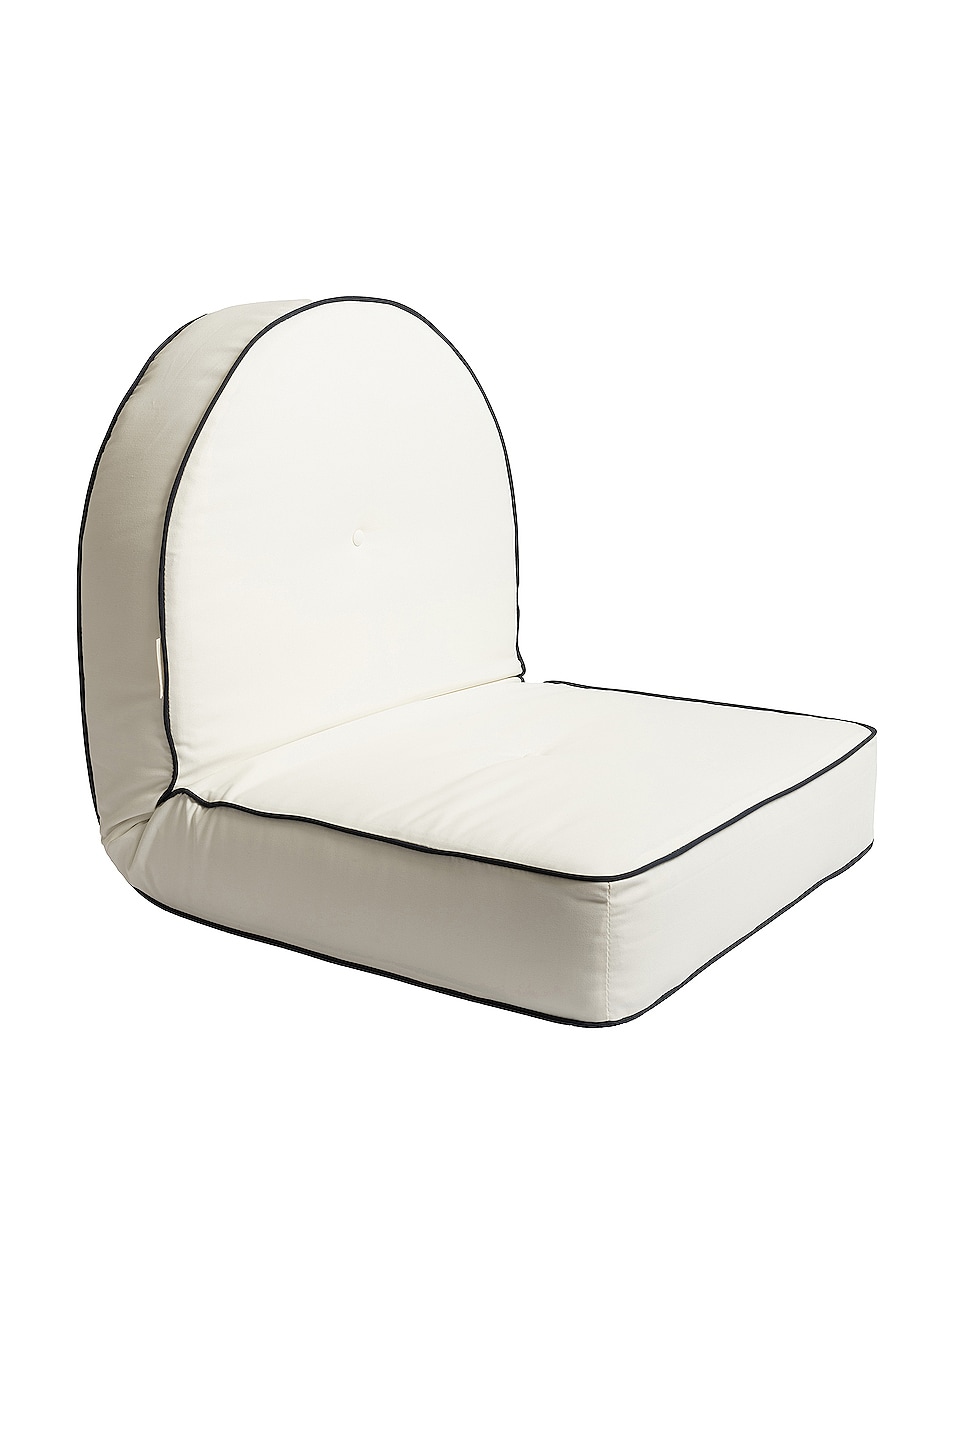 Image 1 of business & pleasure co. Reclining Pillow Lounger in Antique White